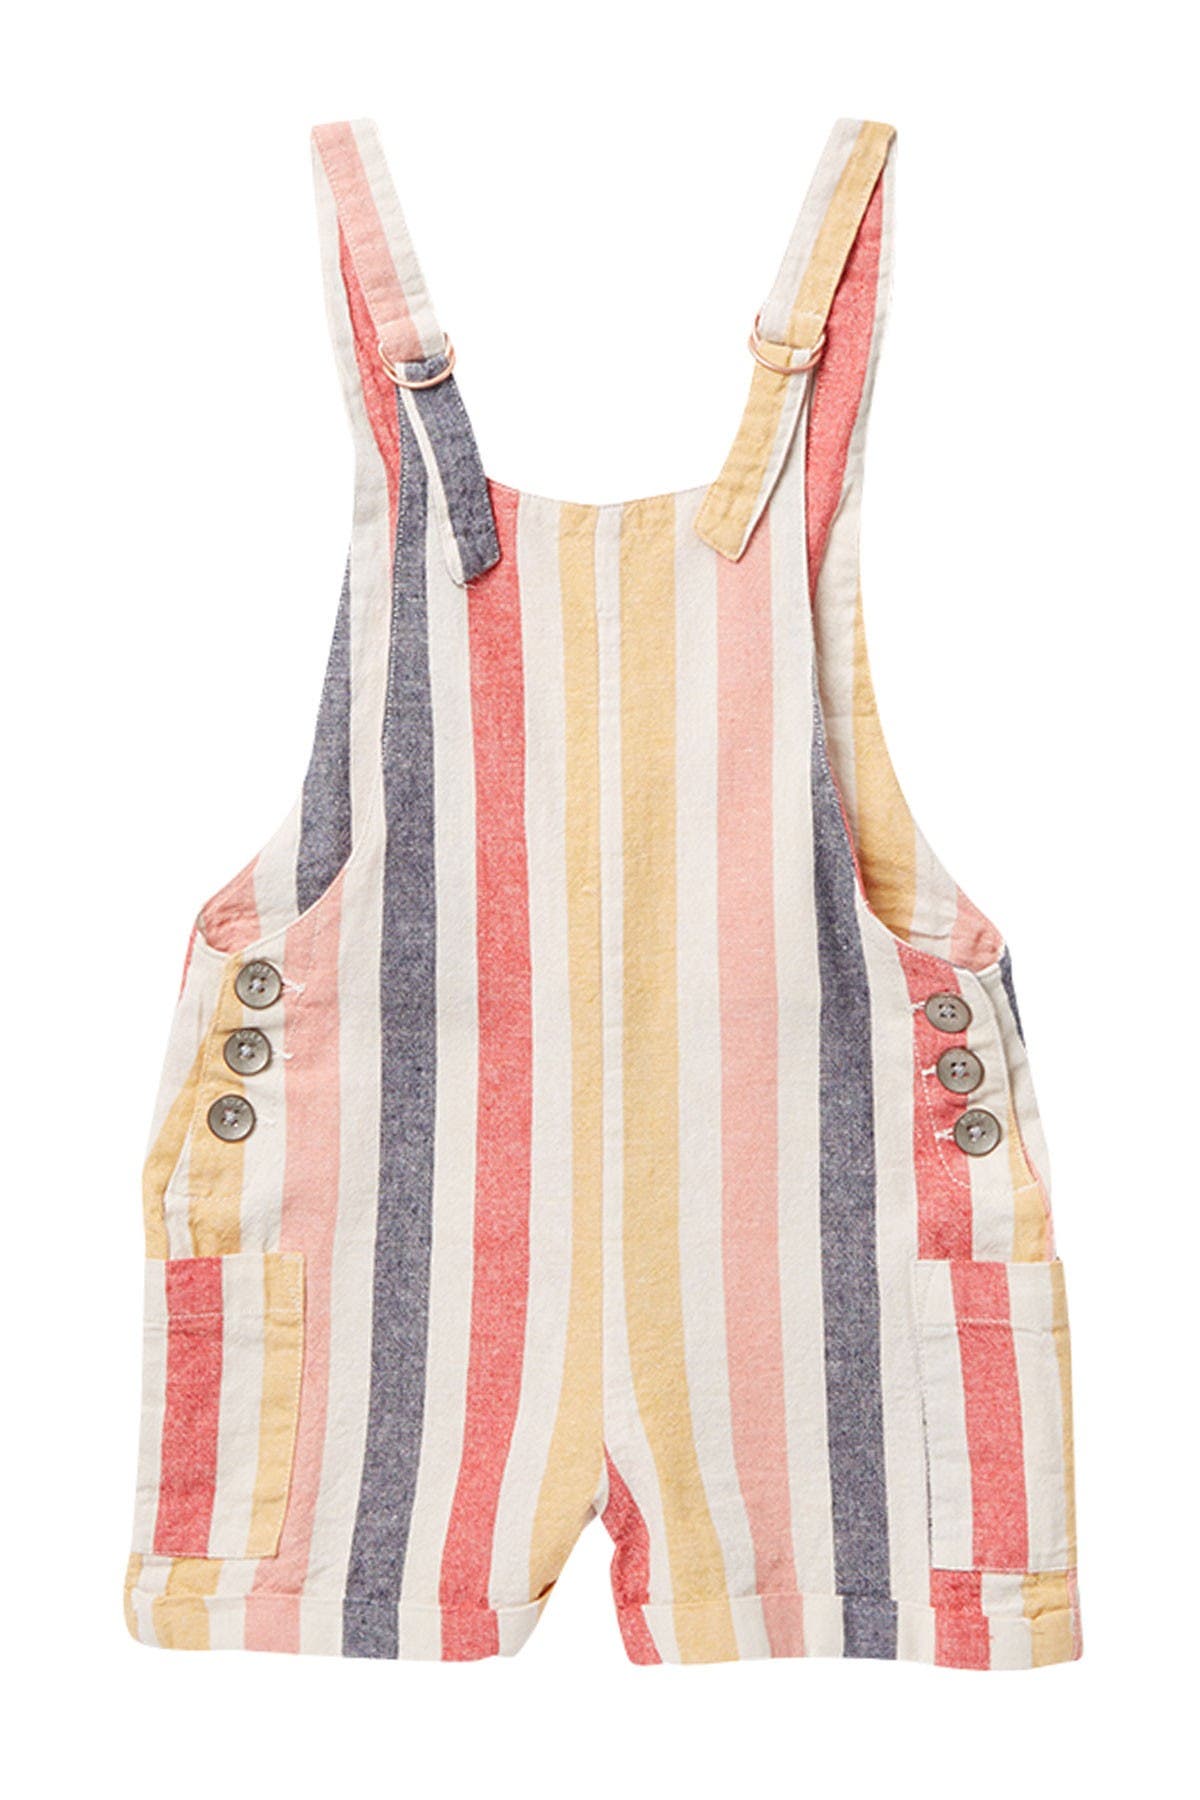 youth girls overalls